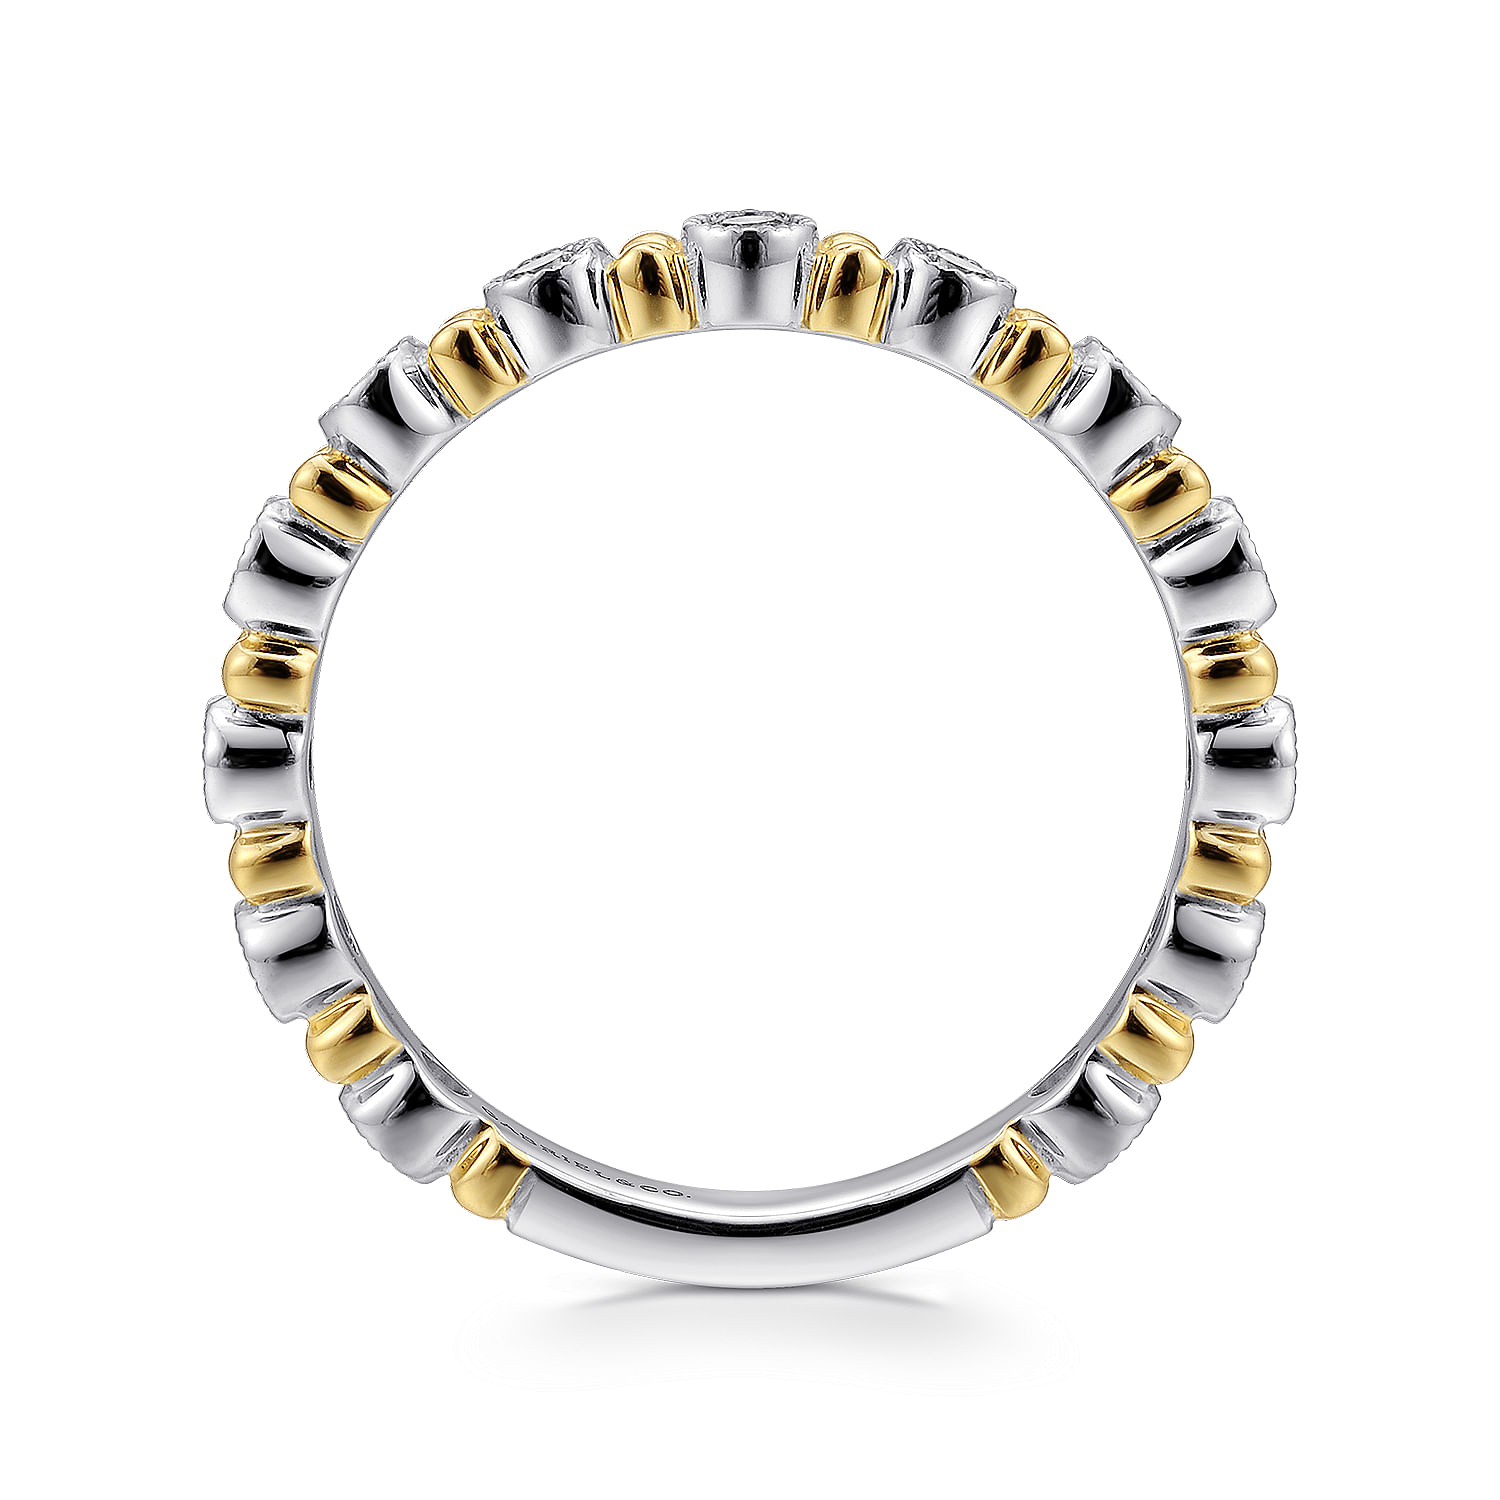 14K-White-Gold-Stackable-Diamond-Ring-with-Yellow-Gold-Bead-Spacers2